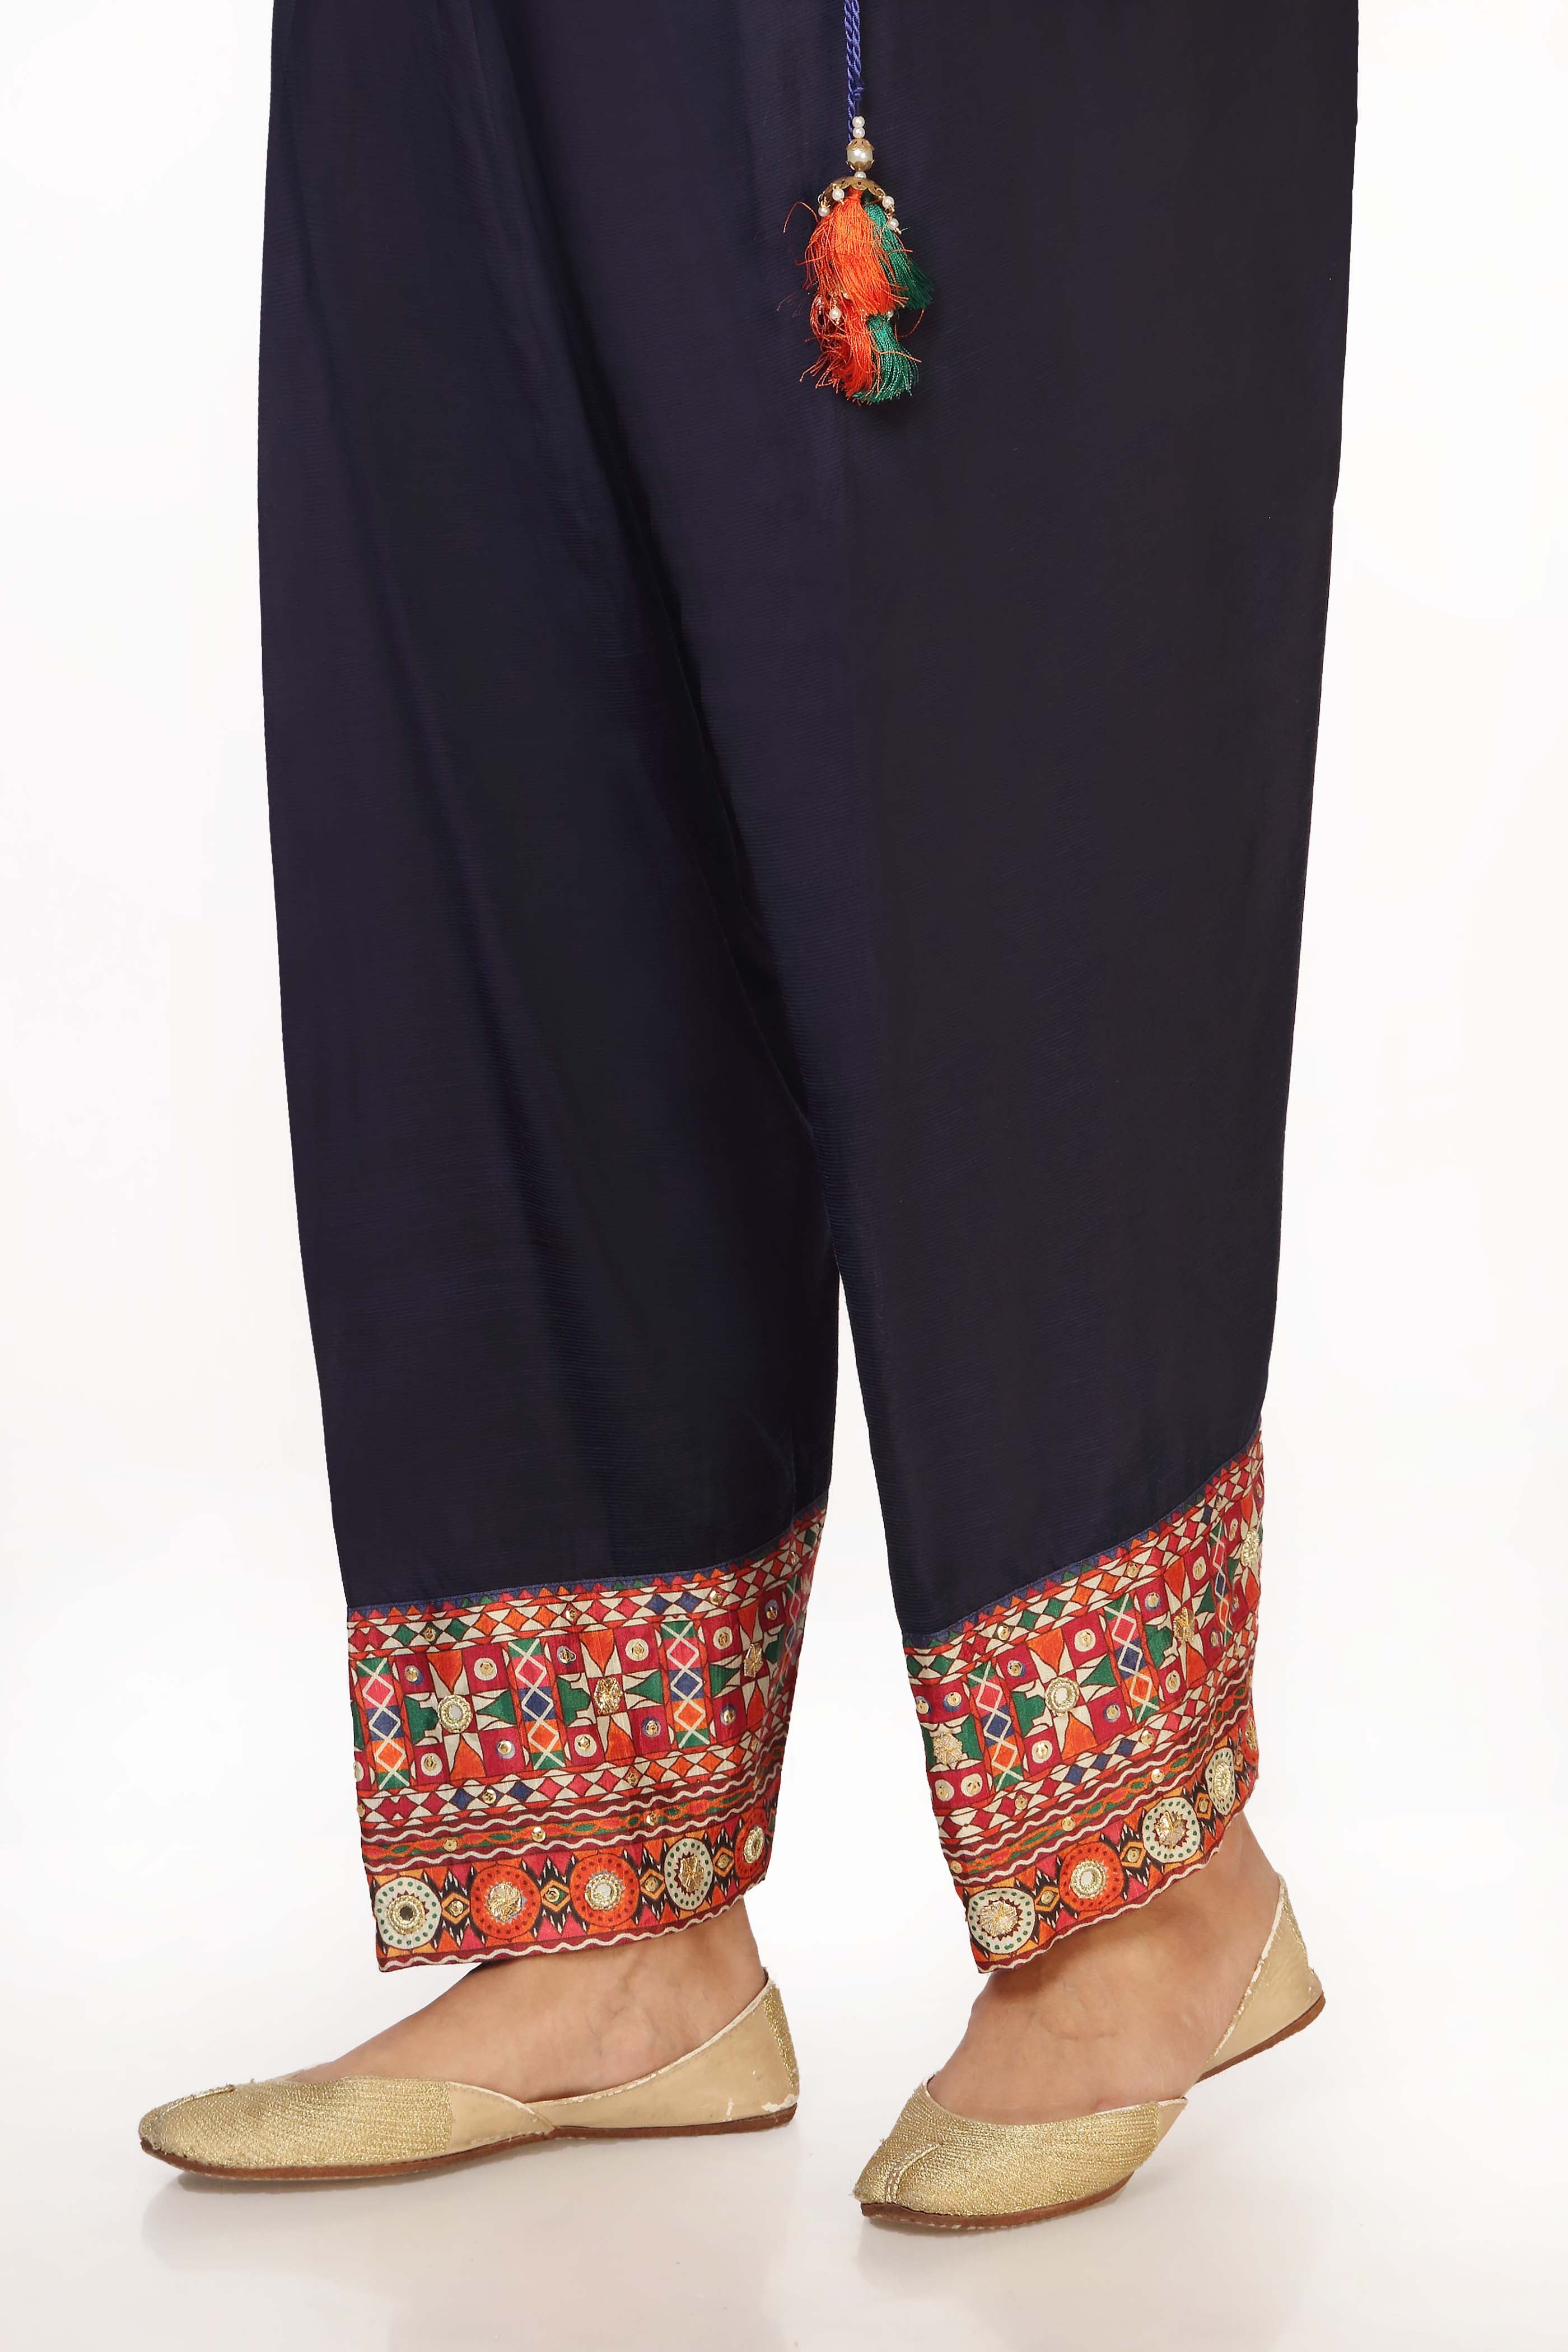 Square Shalwar in Navy Blue coloured Printed Lawn fabric 2